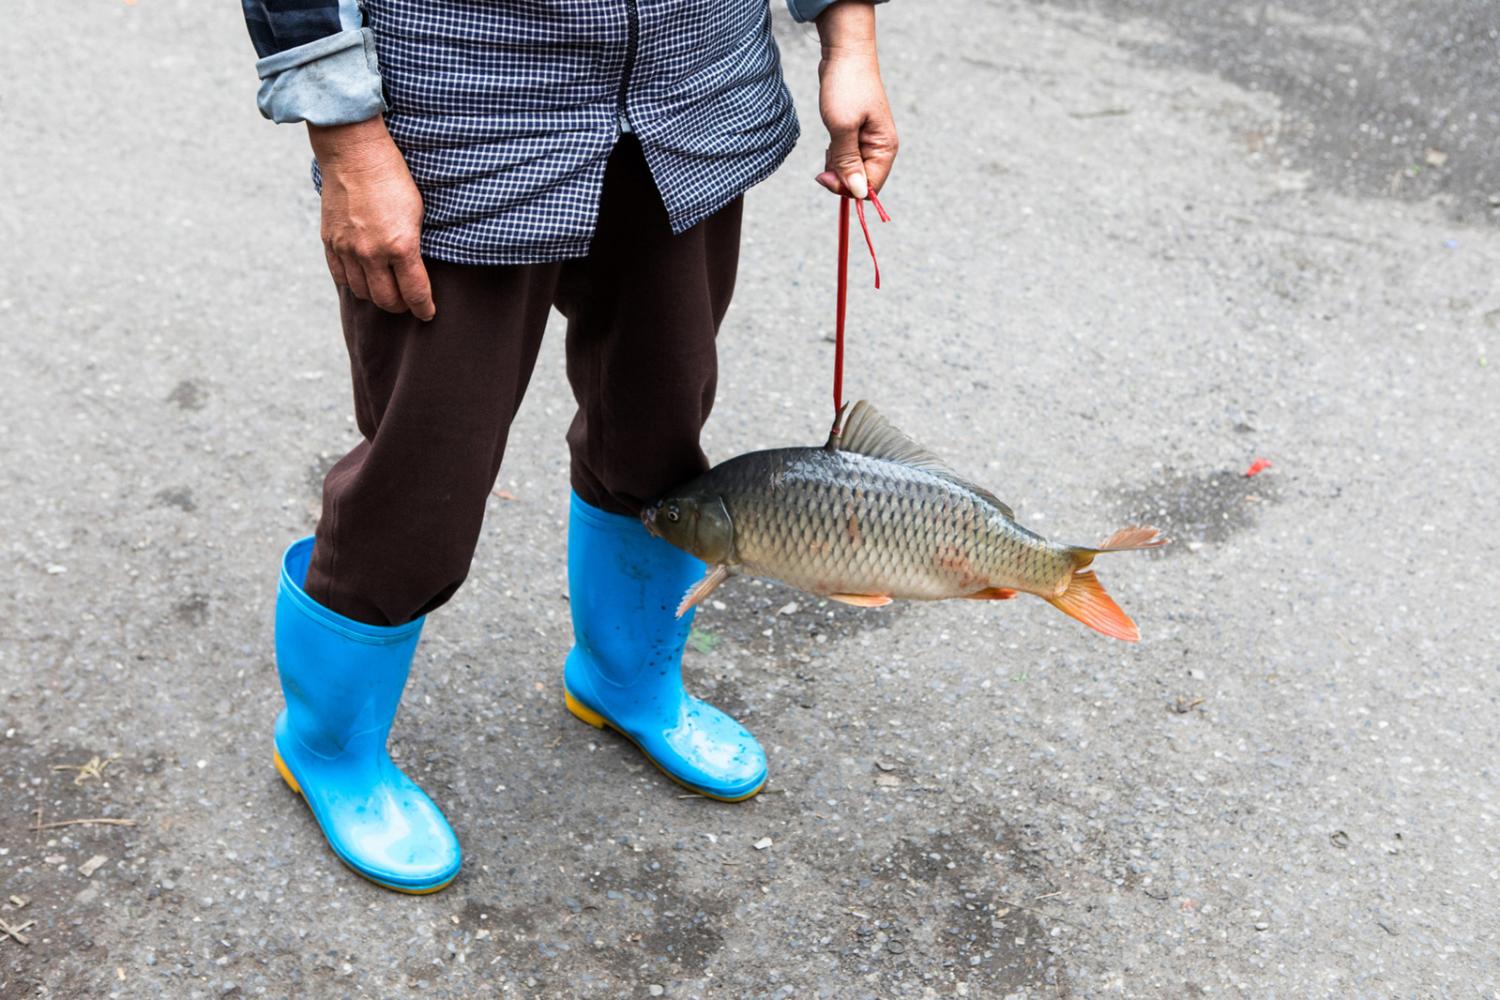 Image from Singles - A fishmonger carries a fish in Hanoi, Vietnam.